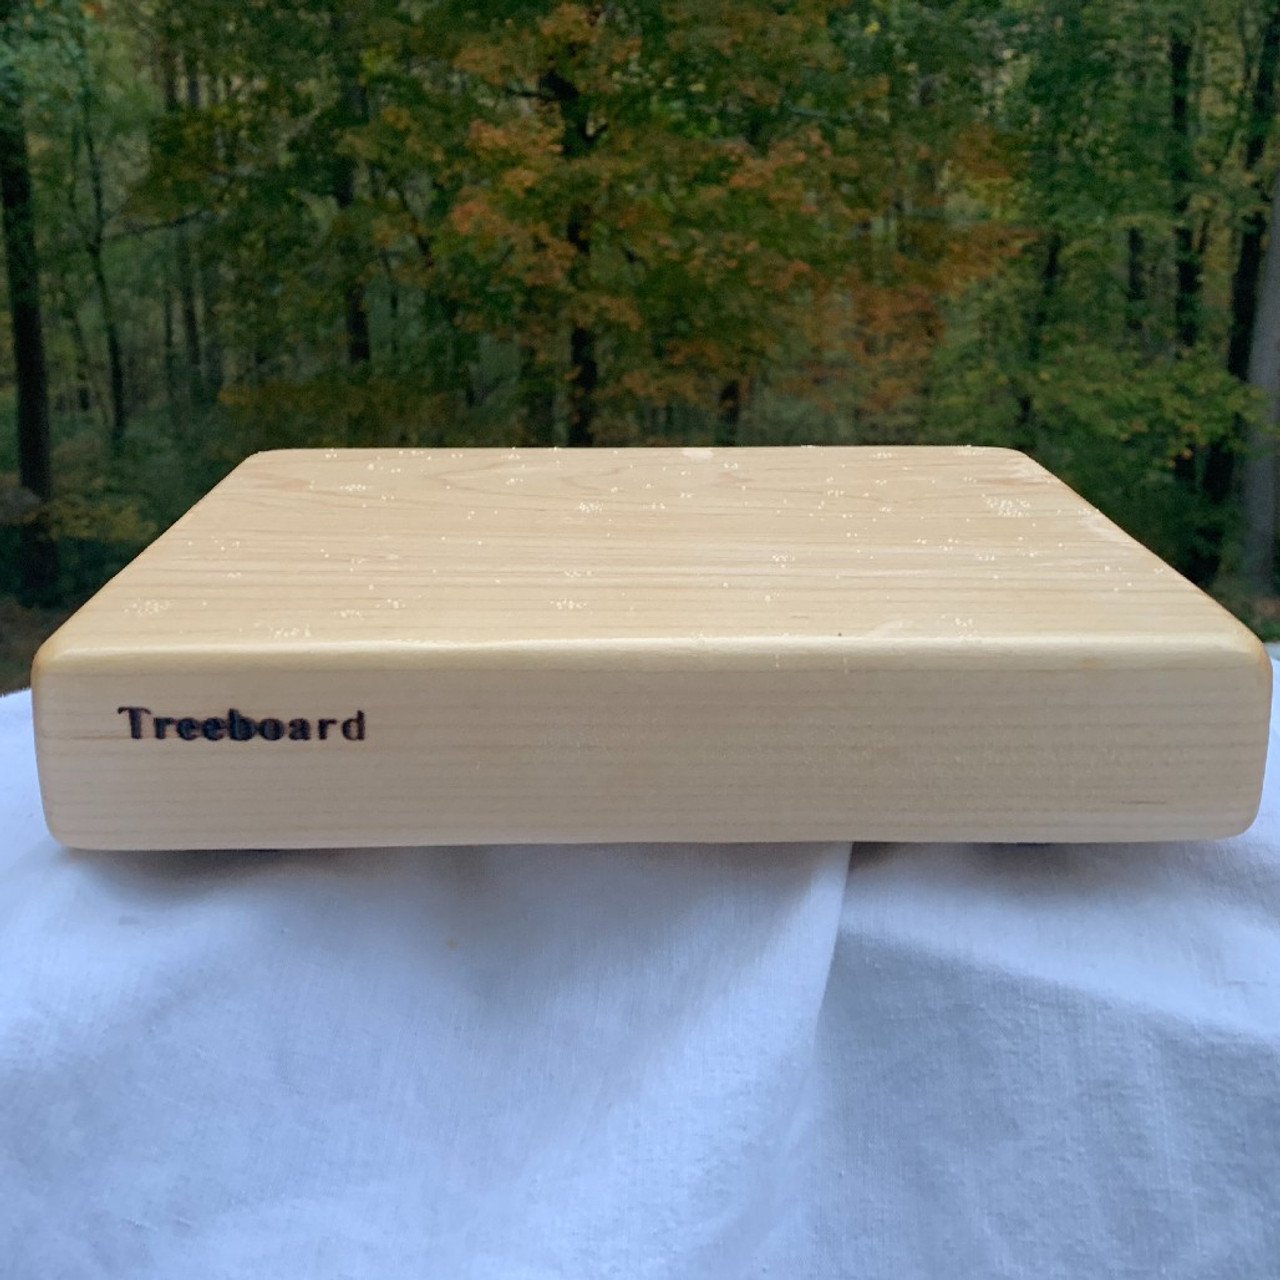 https://cdn11.bigcommerce.com/s-1vey7r6116/images/stencil/1280x1280/products/132/487/small-hard-maple-cutting-board-by-Treeboard-trees-rain__20099.1669568255.jpg?c=1